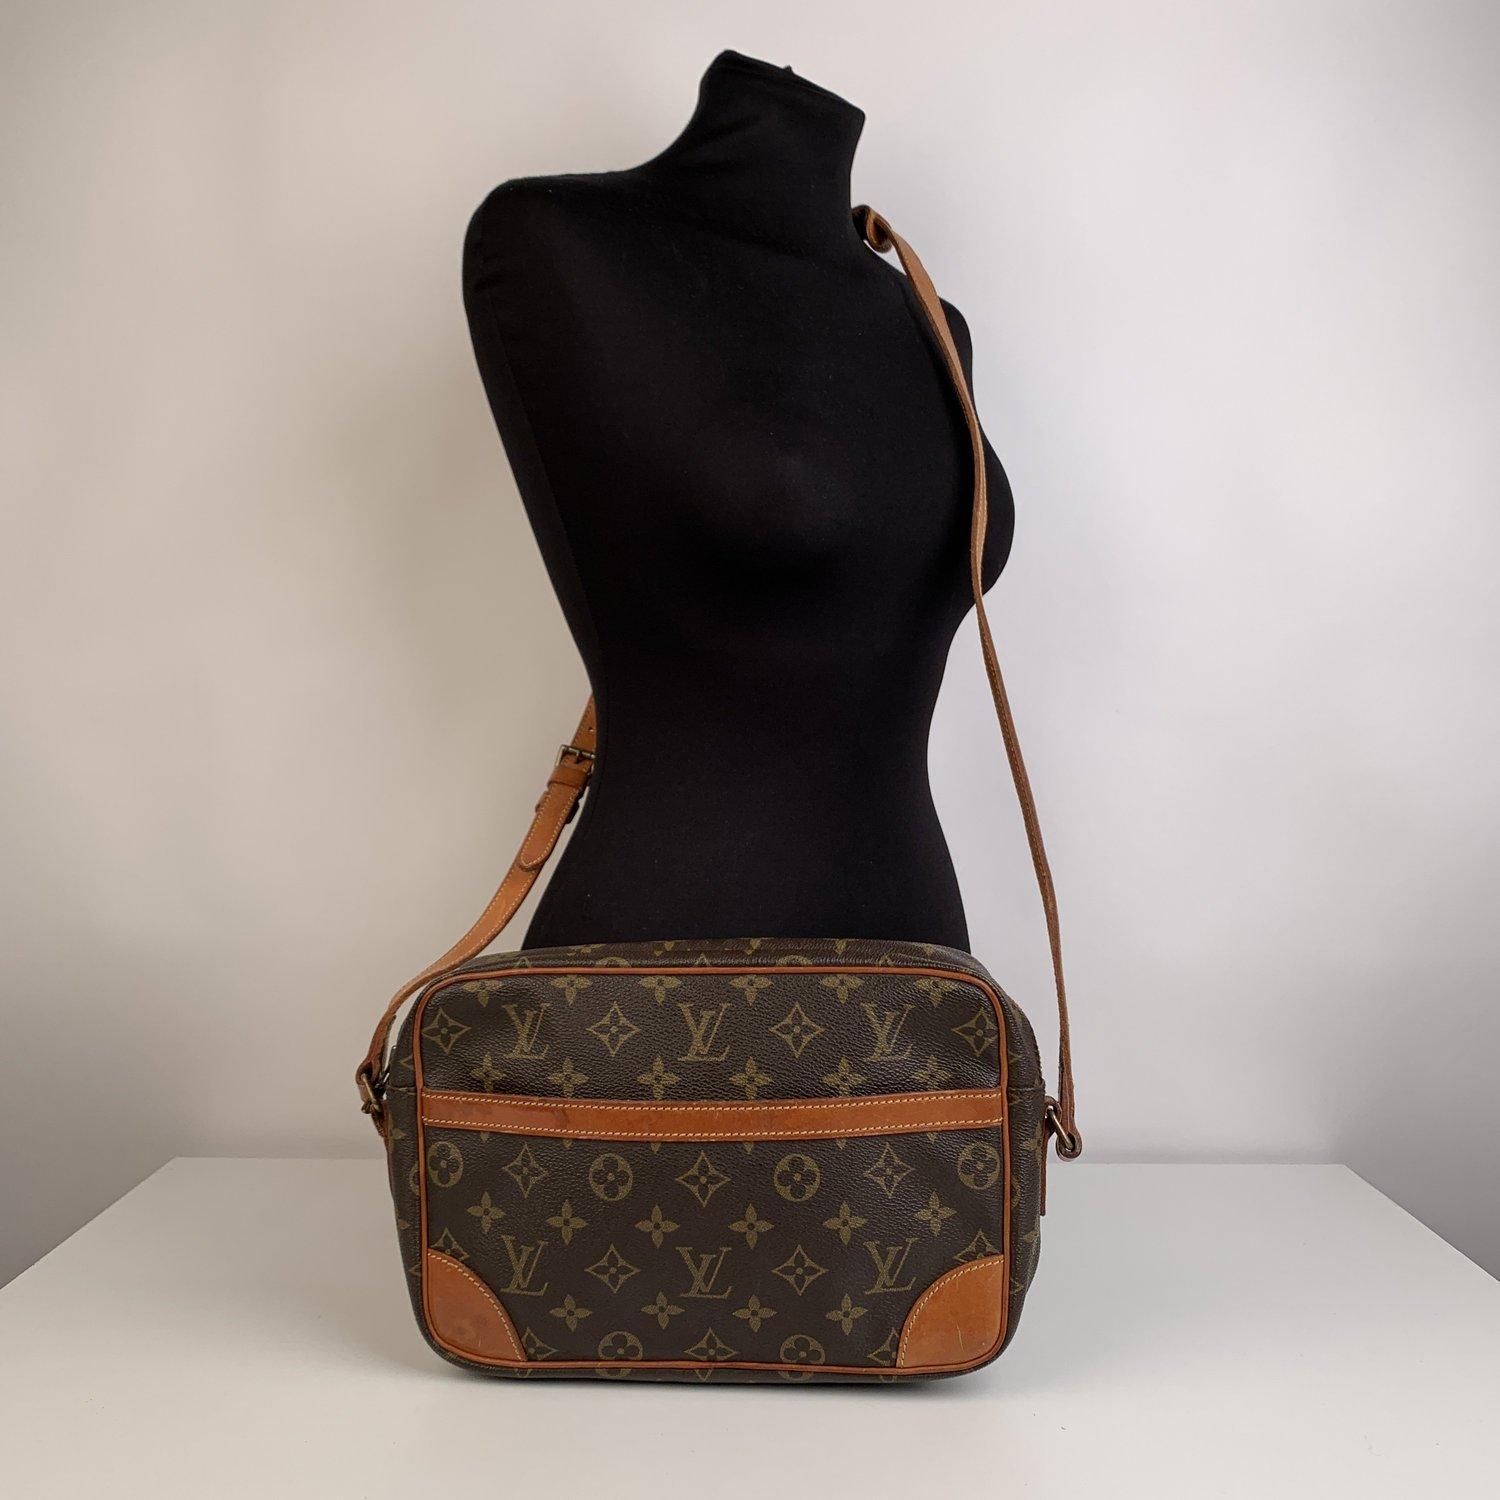 MATERIAL: Canvas COLOR: Brown MODEL: Trocadero 25 GENDER: Women SIZE: Medium Condition B - VERY GOOD Some light wear of use - some nomral wear of use on hardware, normal wear of use on the internal lining. The lining of the internal pocket is